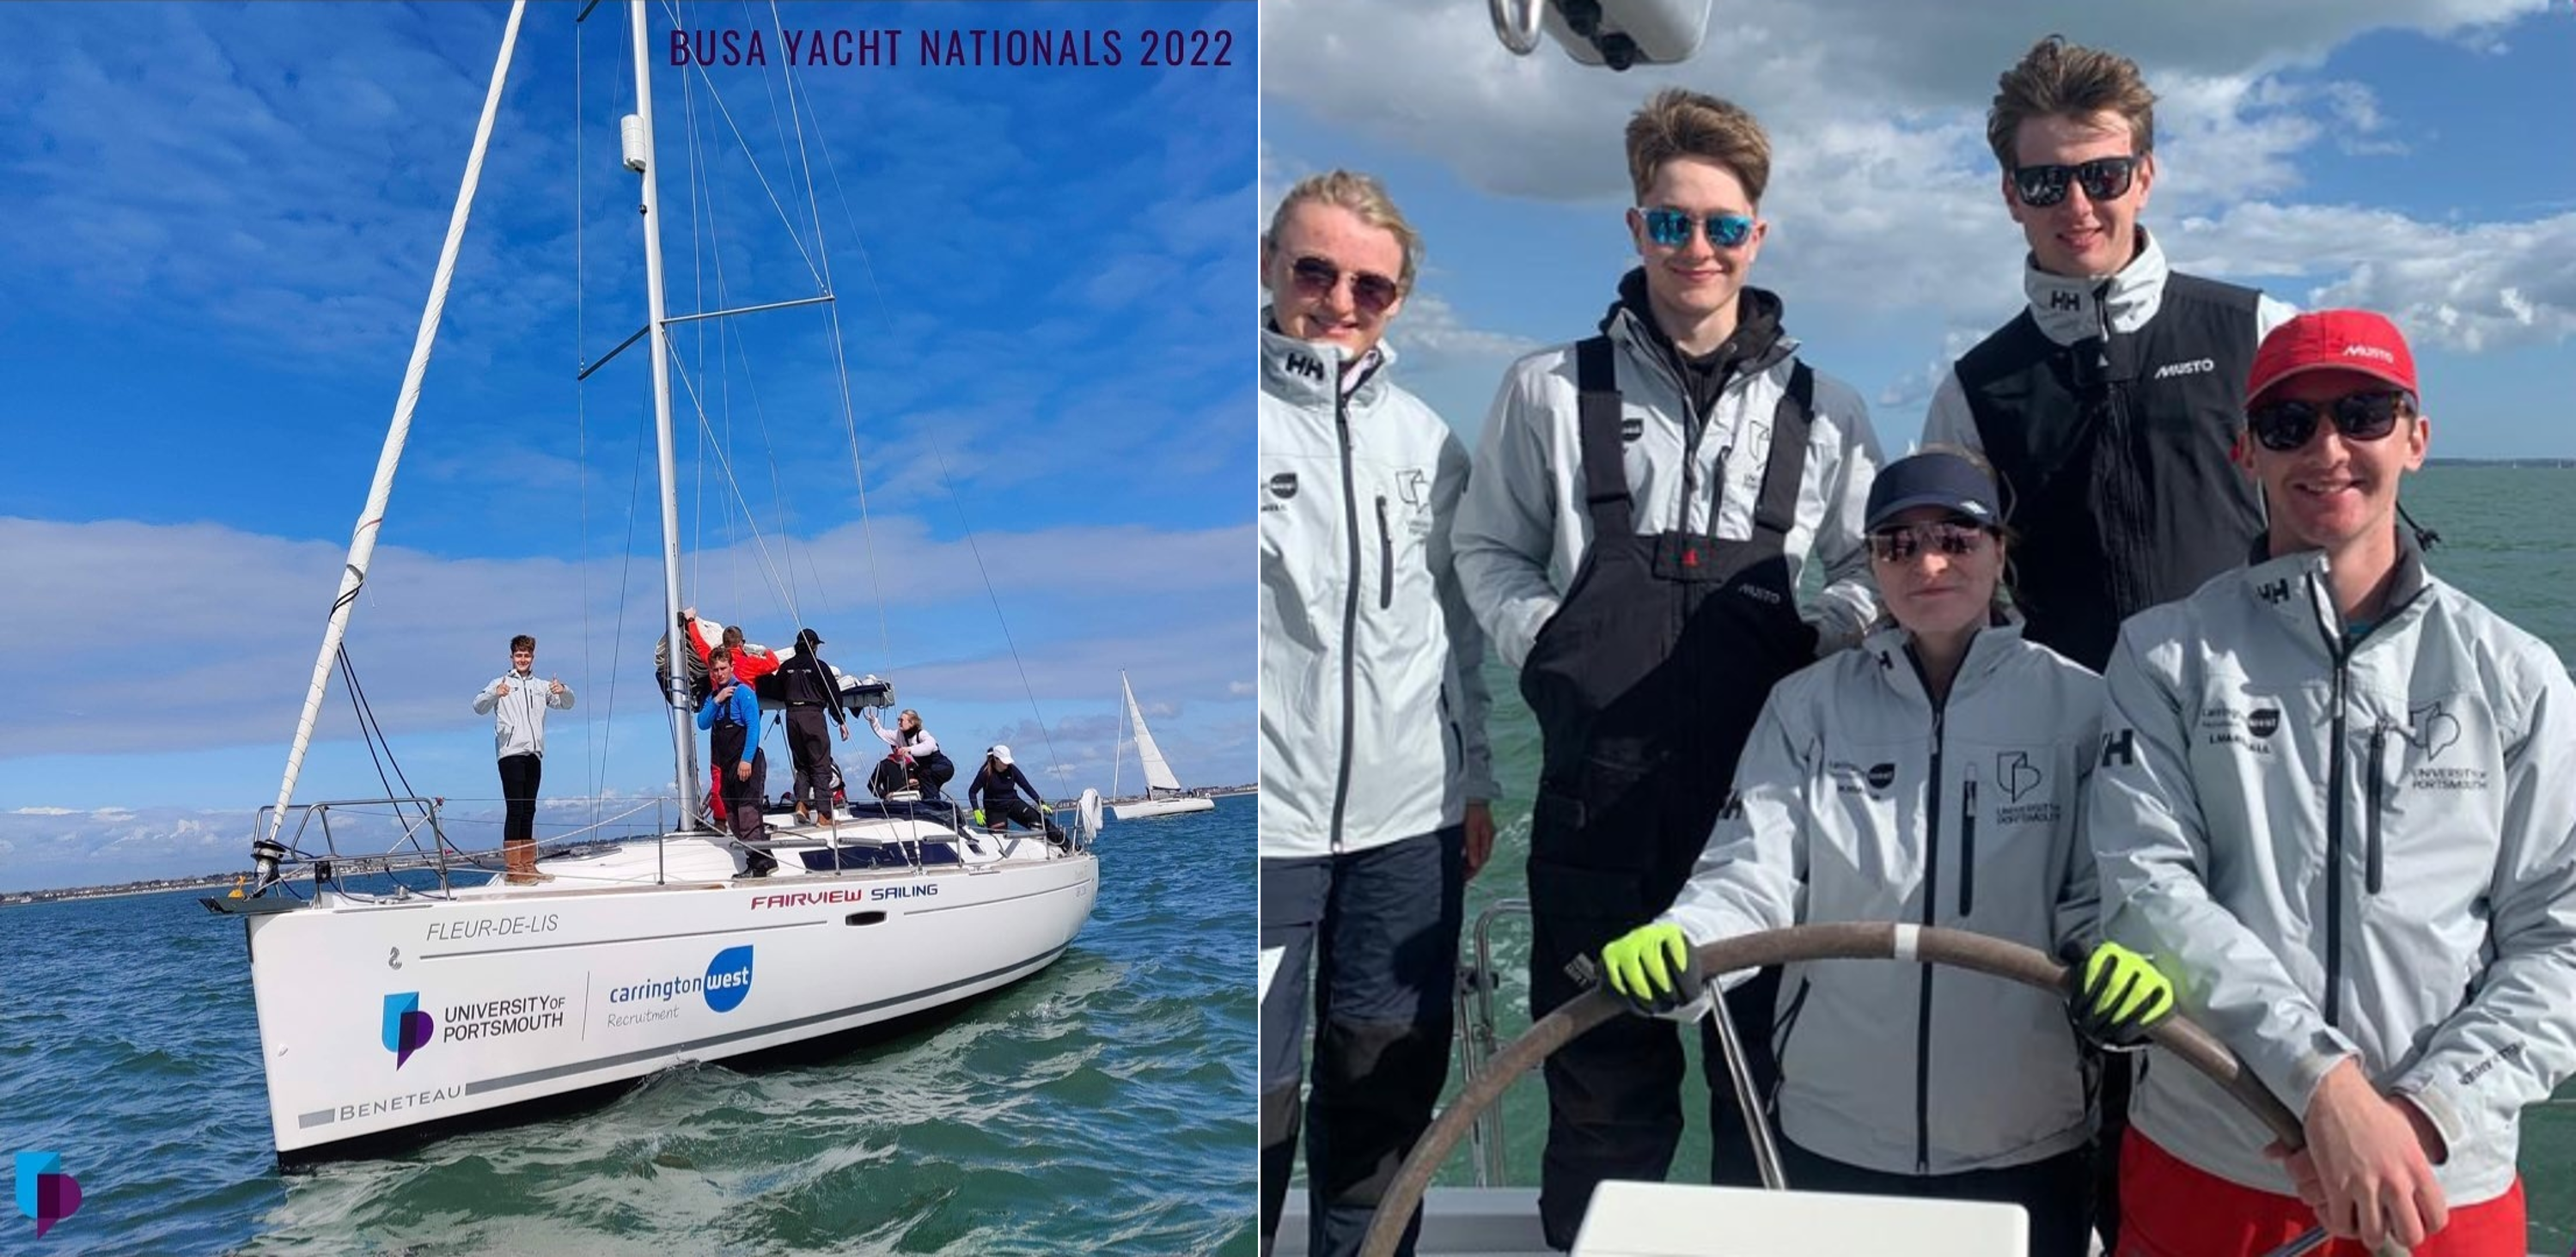 University of Portsmouth Sailing Club team and boat BUSA Yacht Nationals 2022 